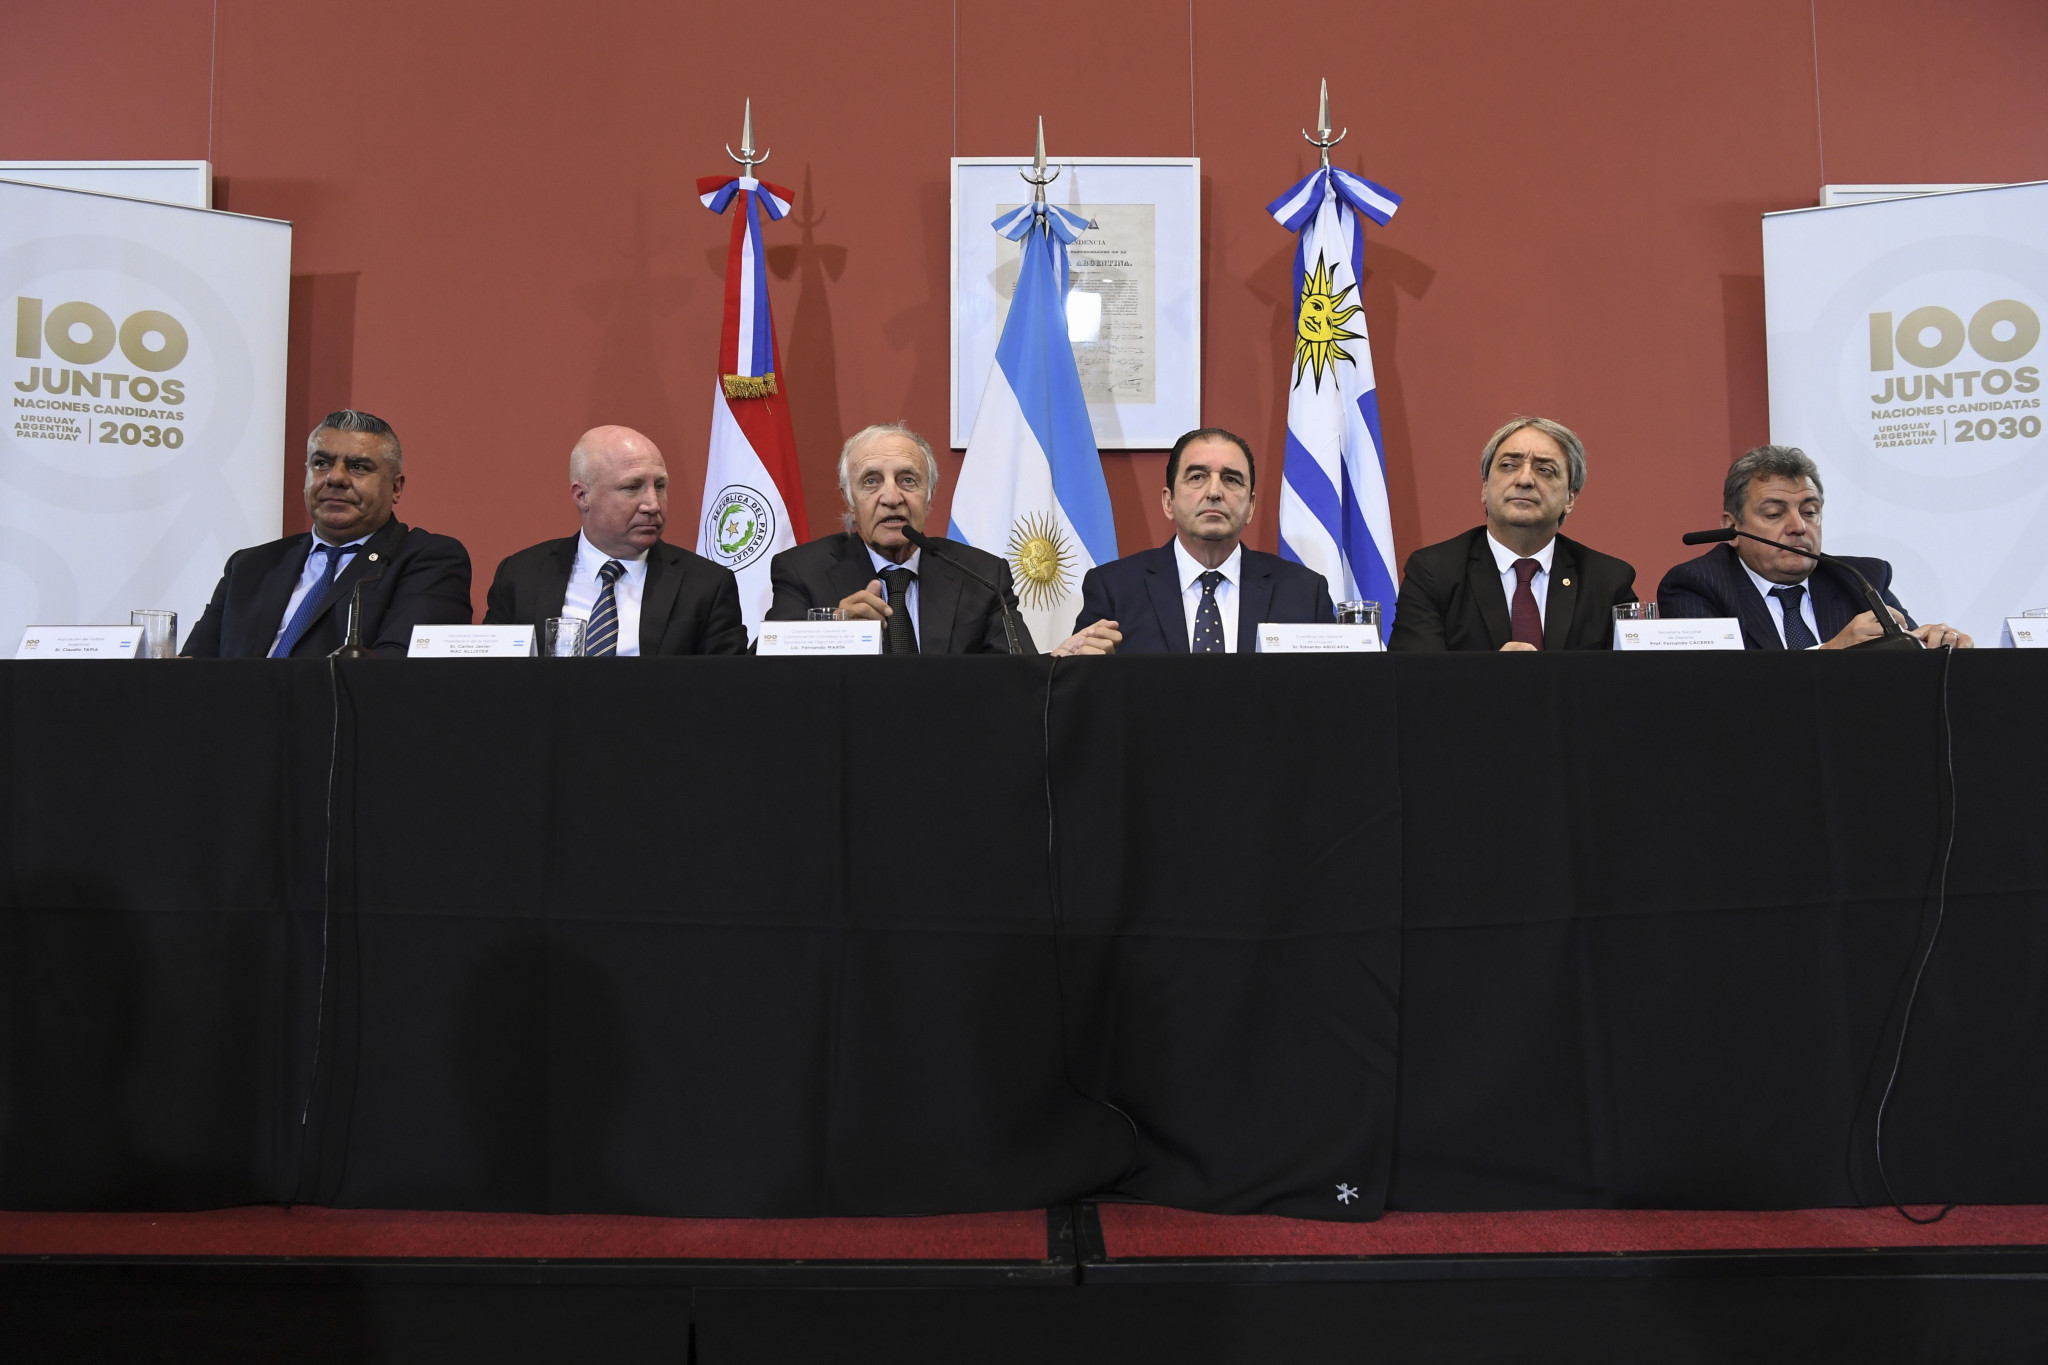 Paraguay, Argentina and Uruguay have already announced plans to bid for the 2030 FIFA World Cup as a trio ©Getty Images